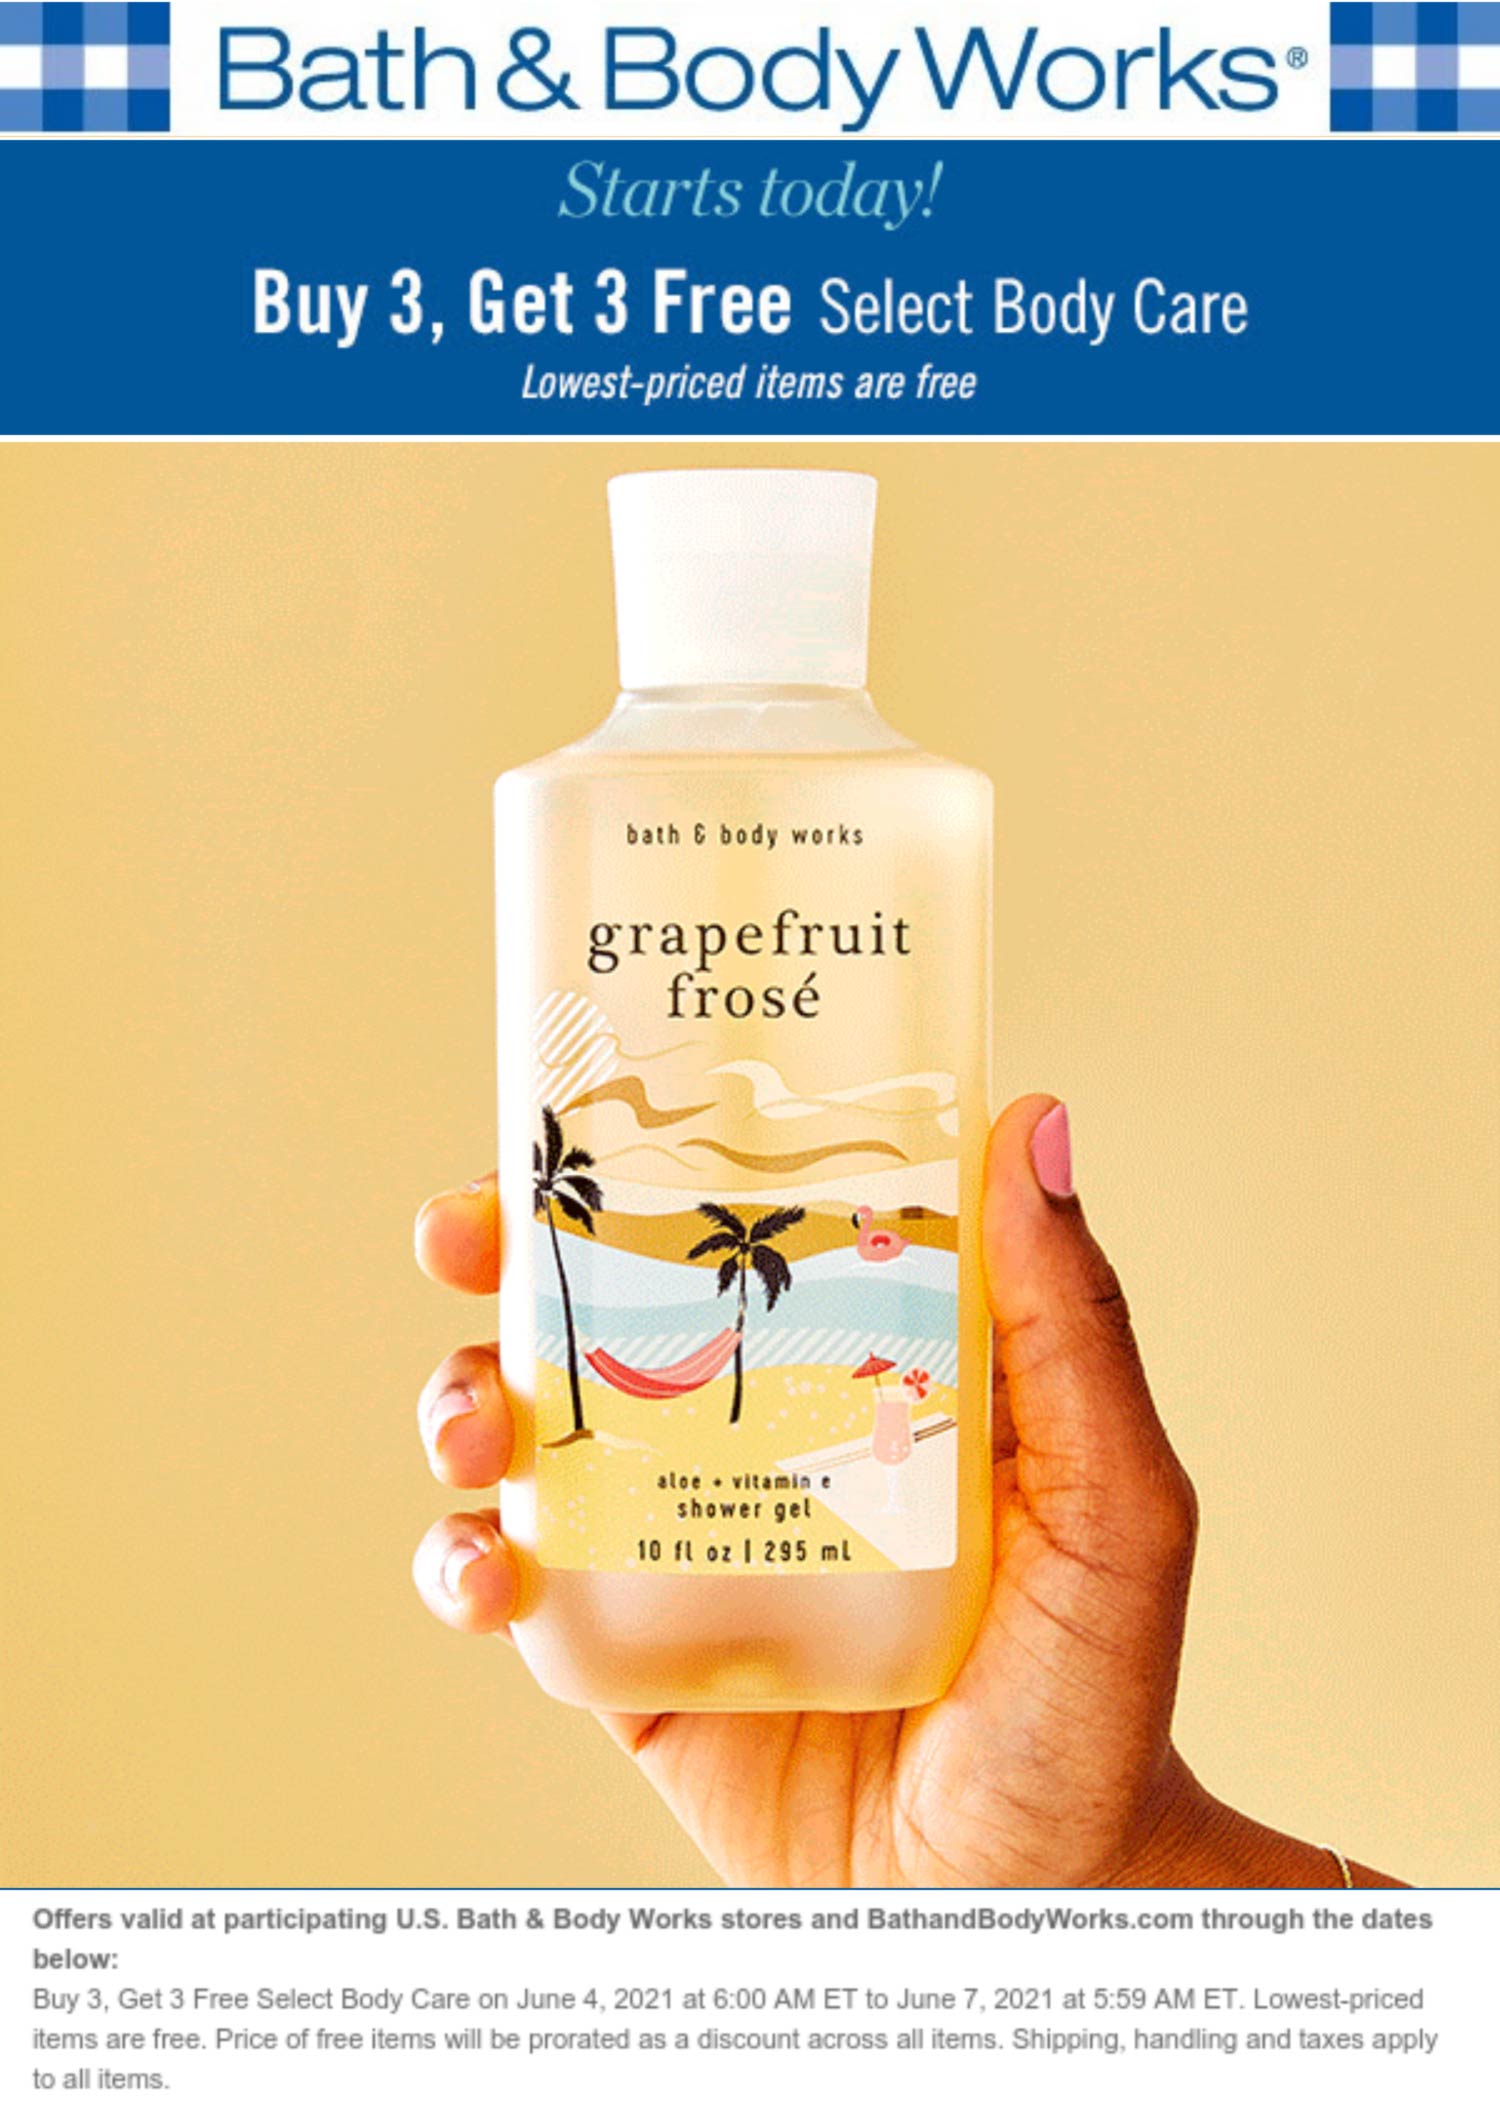 Bath & Body Works stores Coupon  6-for-3 on body care at Bath & Body Works, ditto online #bathbodyworks 